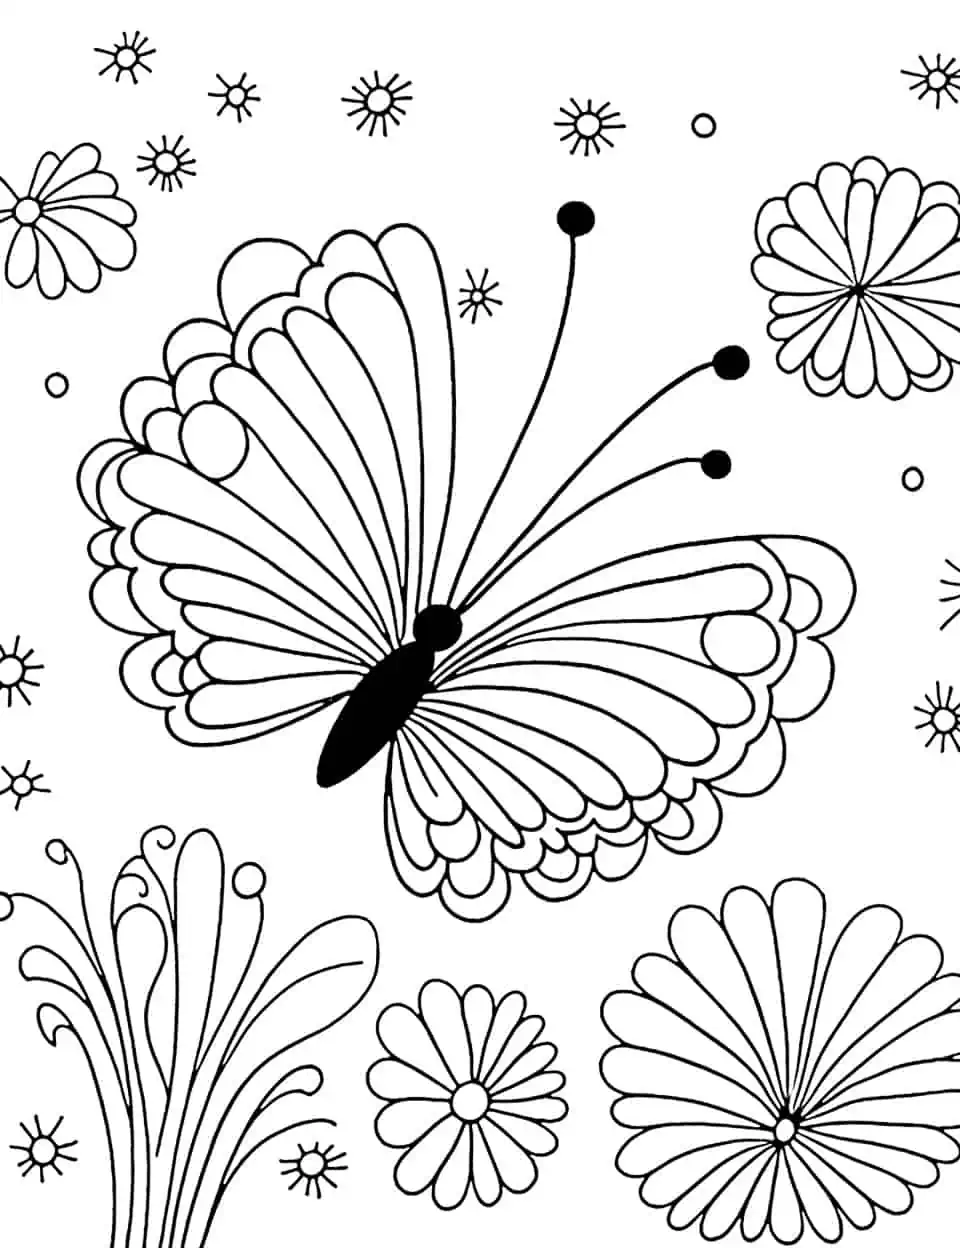 Fluttering Fireworks Butterfly Coloring Page - A festive coloring page showcasing butterflies in vibrant colors resembling fireworks.